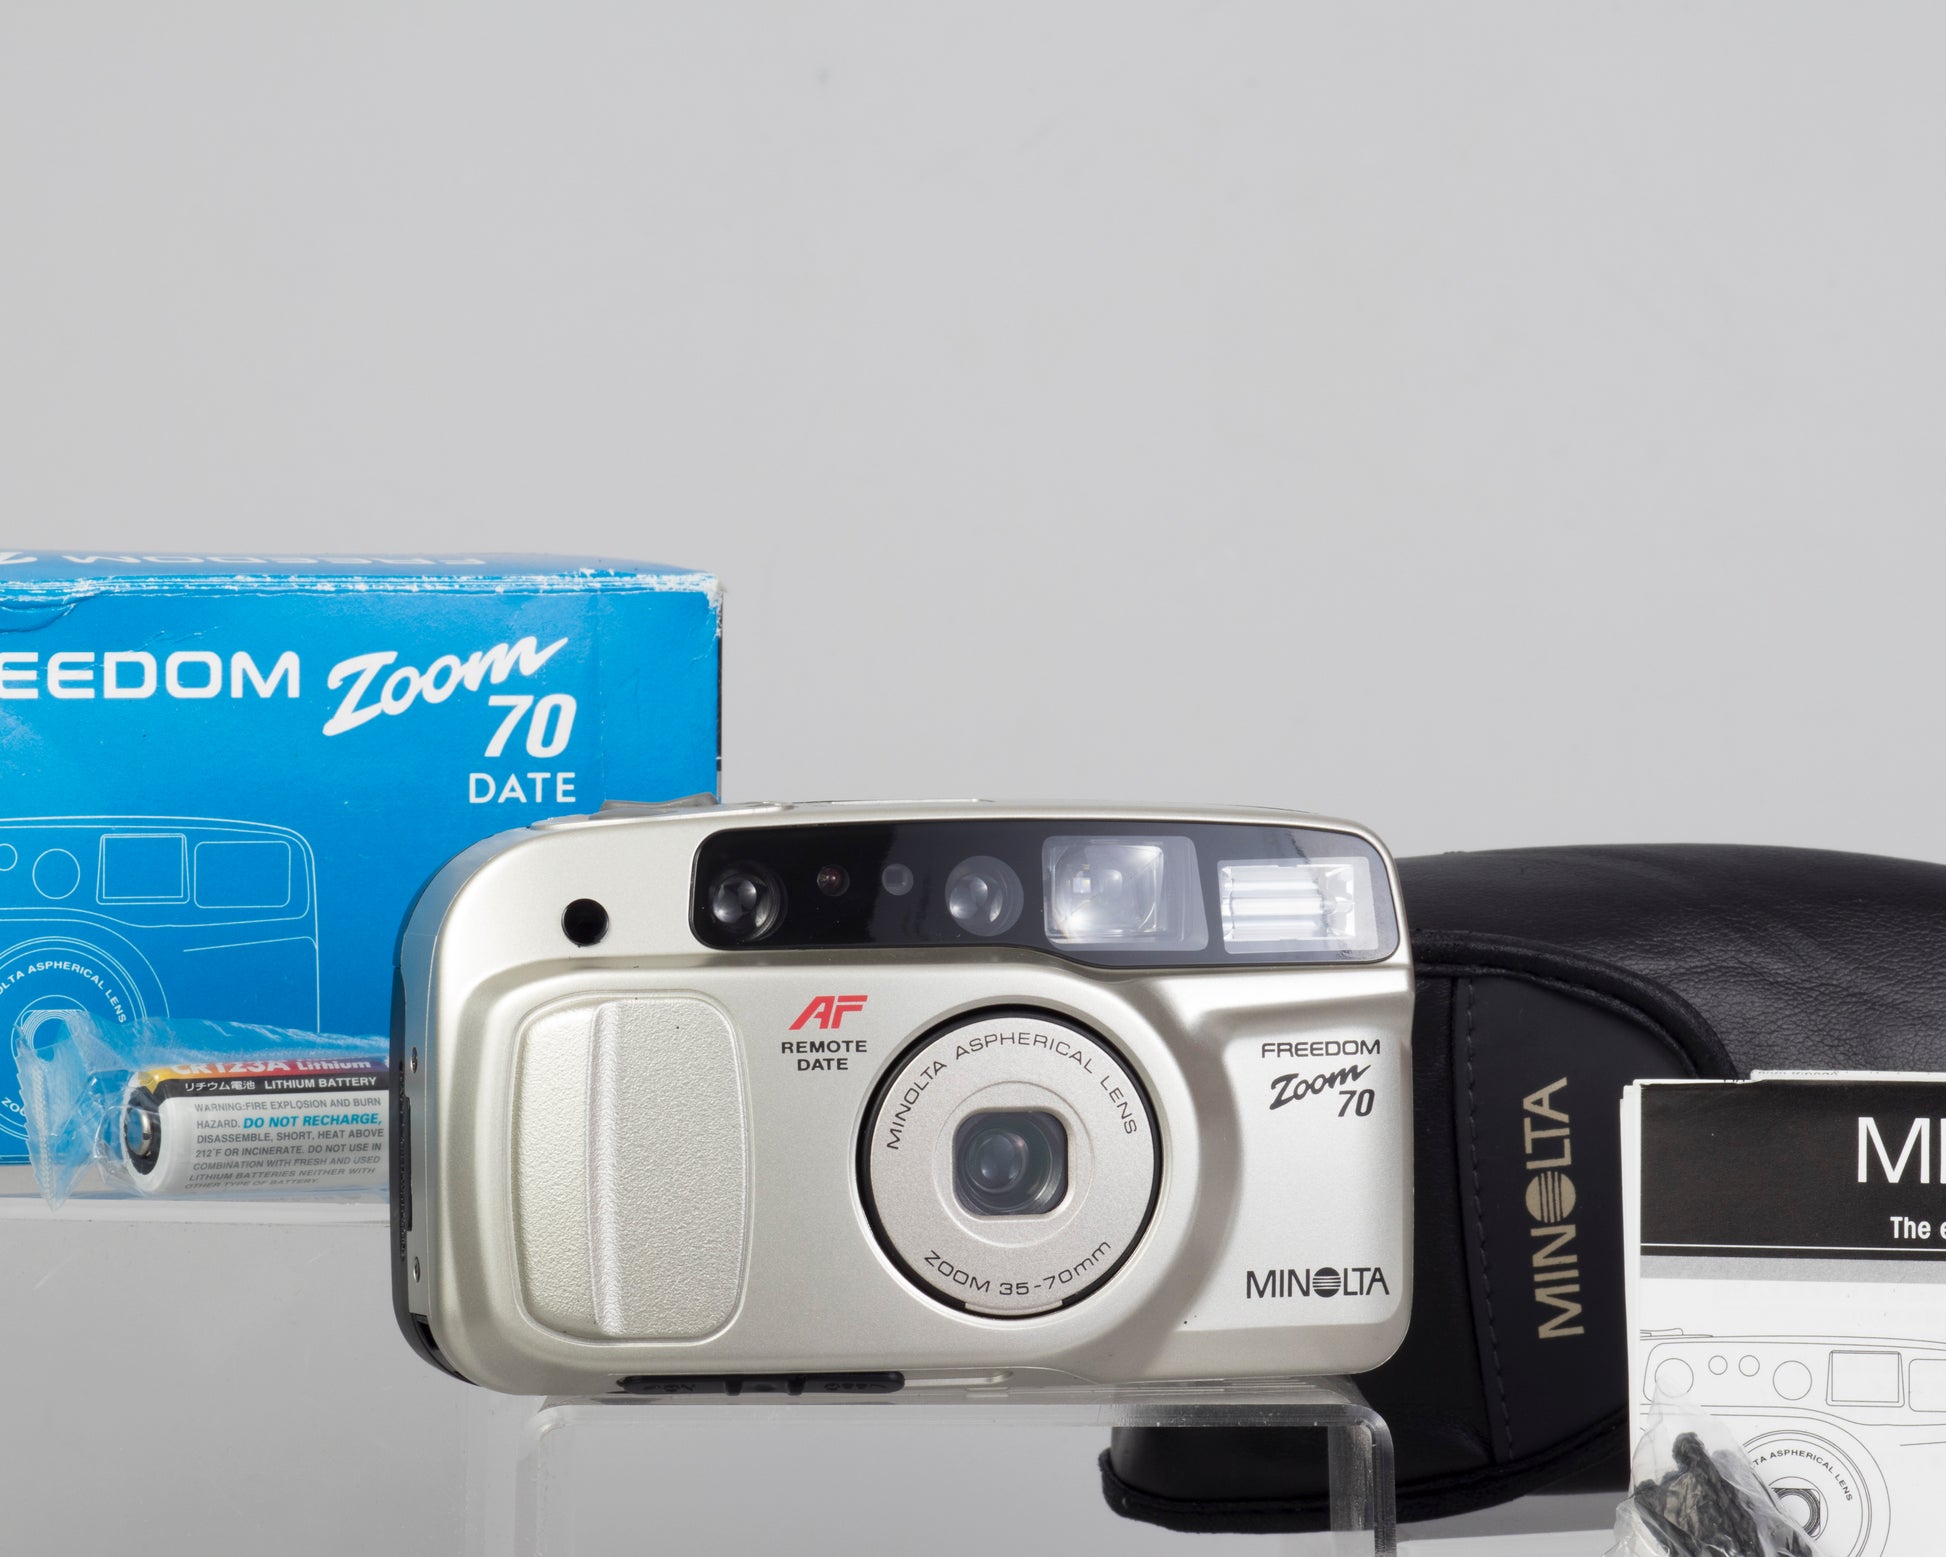 The Minolta Freedom Zoom 70 Date with its original box, case,  strap, manual, and (likely expired) battery